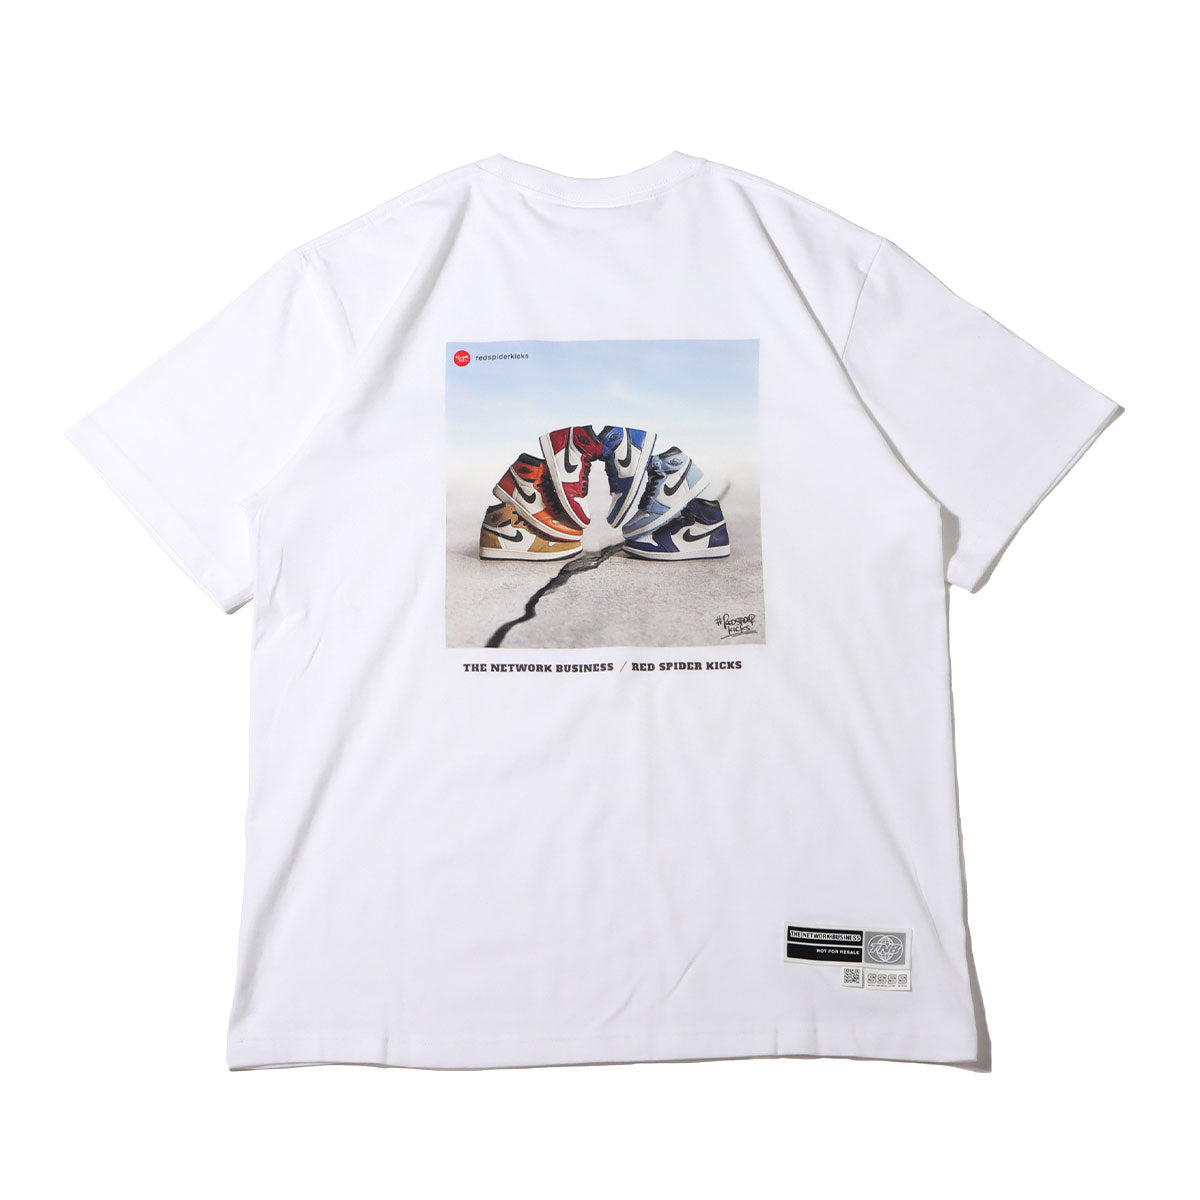 TNB x RED SPIDER KICKS SNEAKER ARCH TEE – THE NETWORK BUSINESS